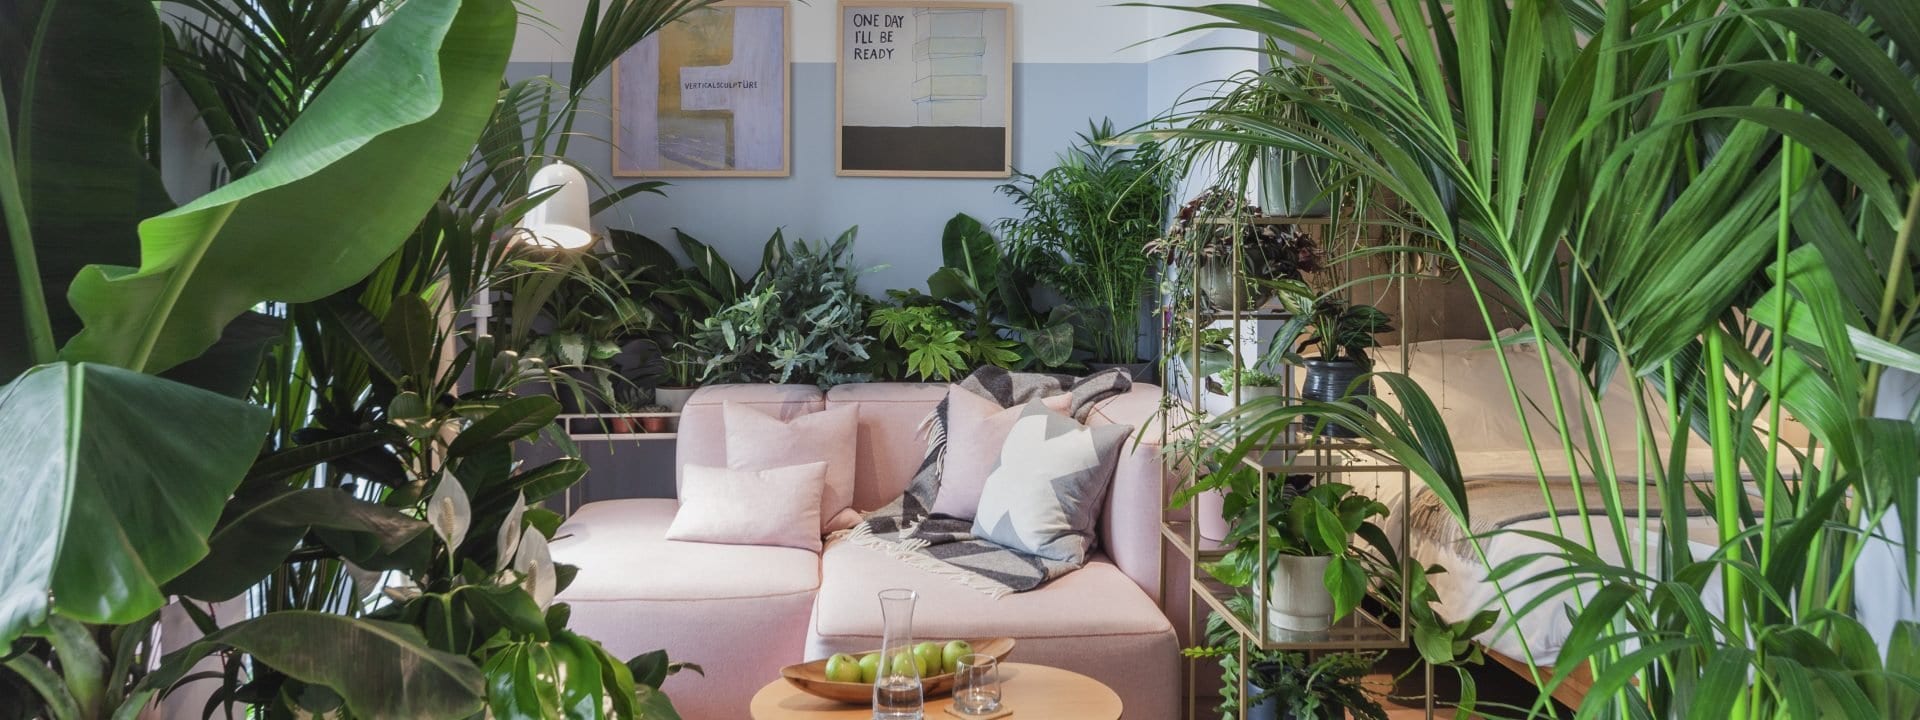 We Try Out London’s First Houseplant Hotel